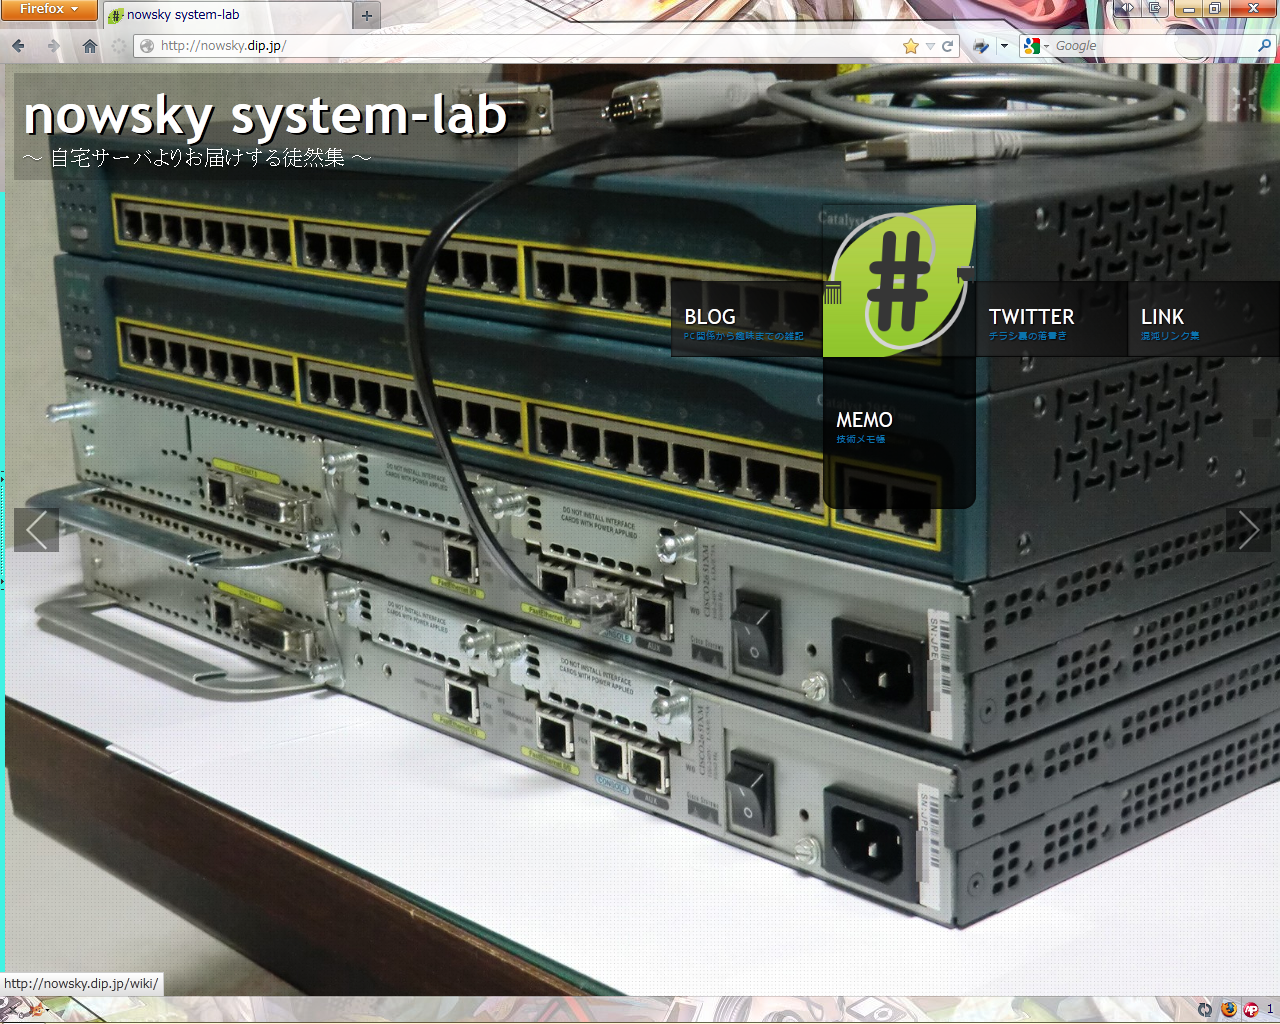 nowsky system-lab 新index.html